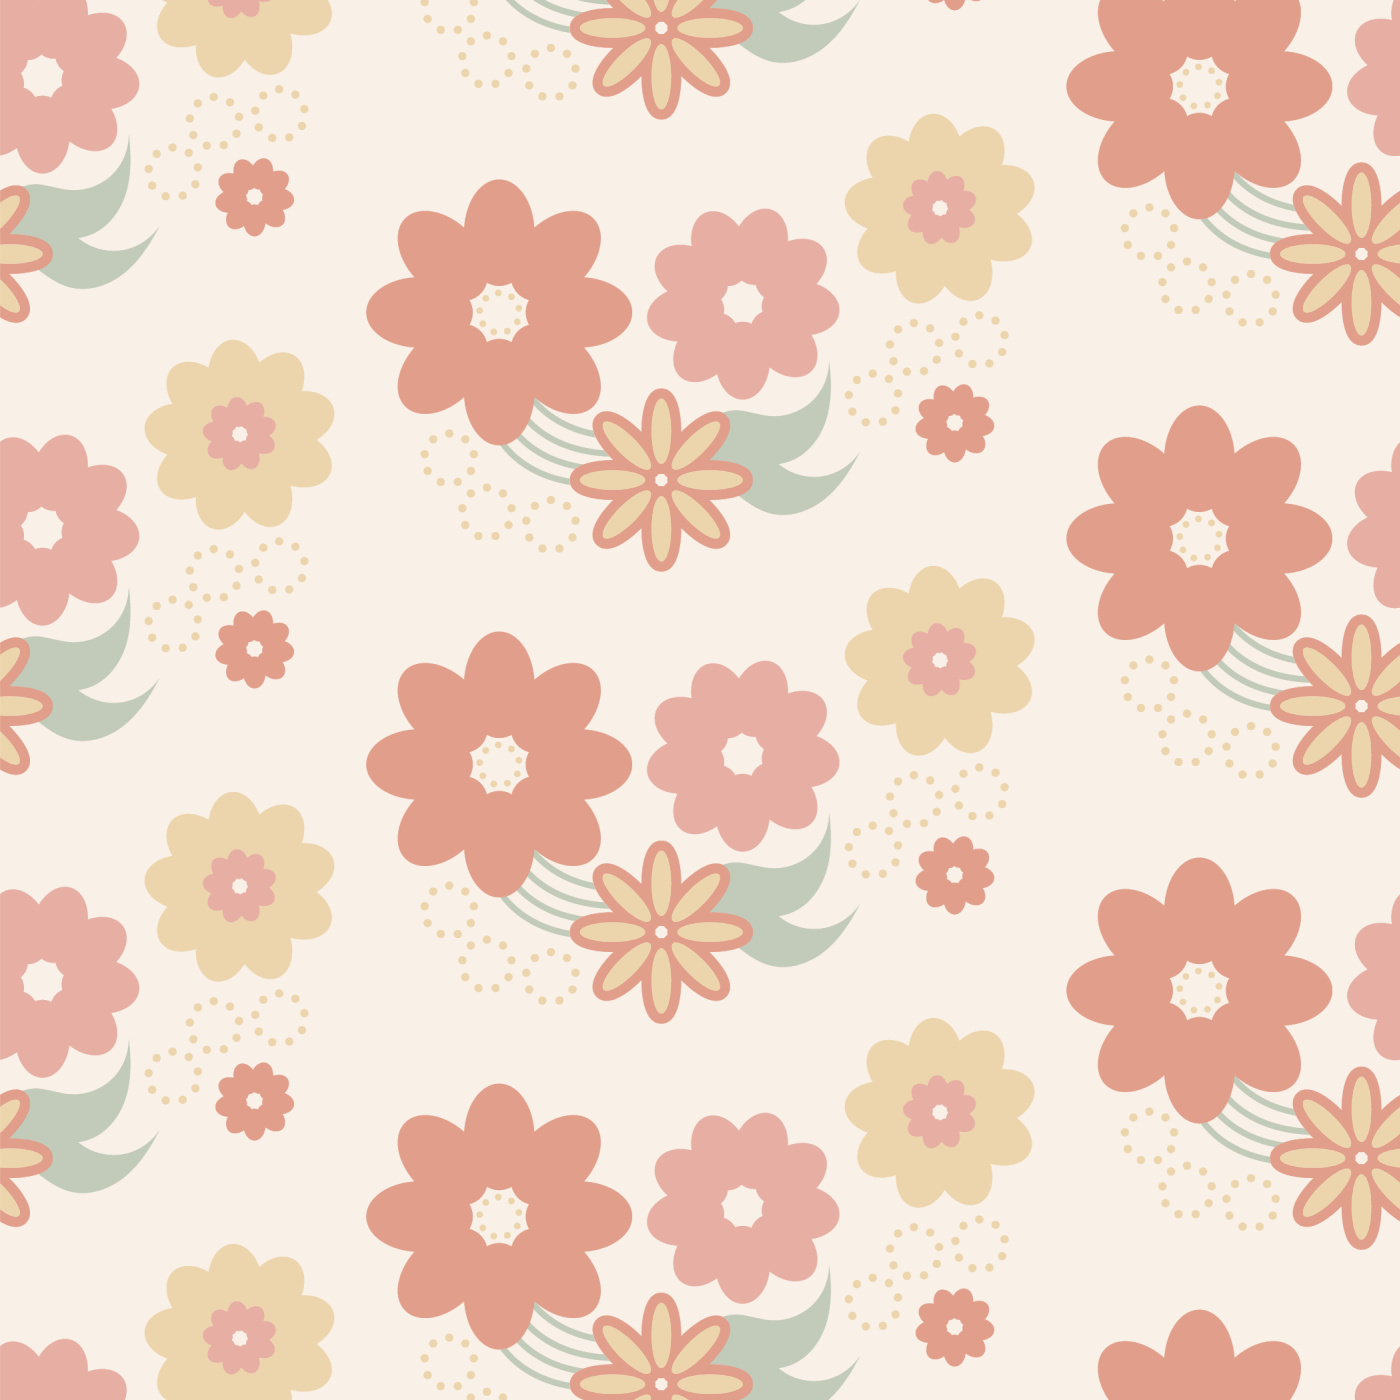 Swooping Floral Wallpaper